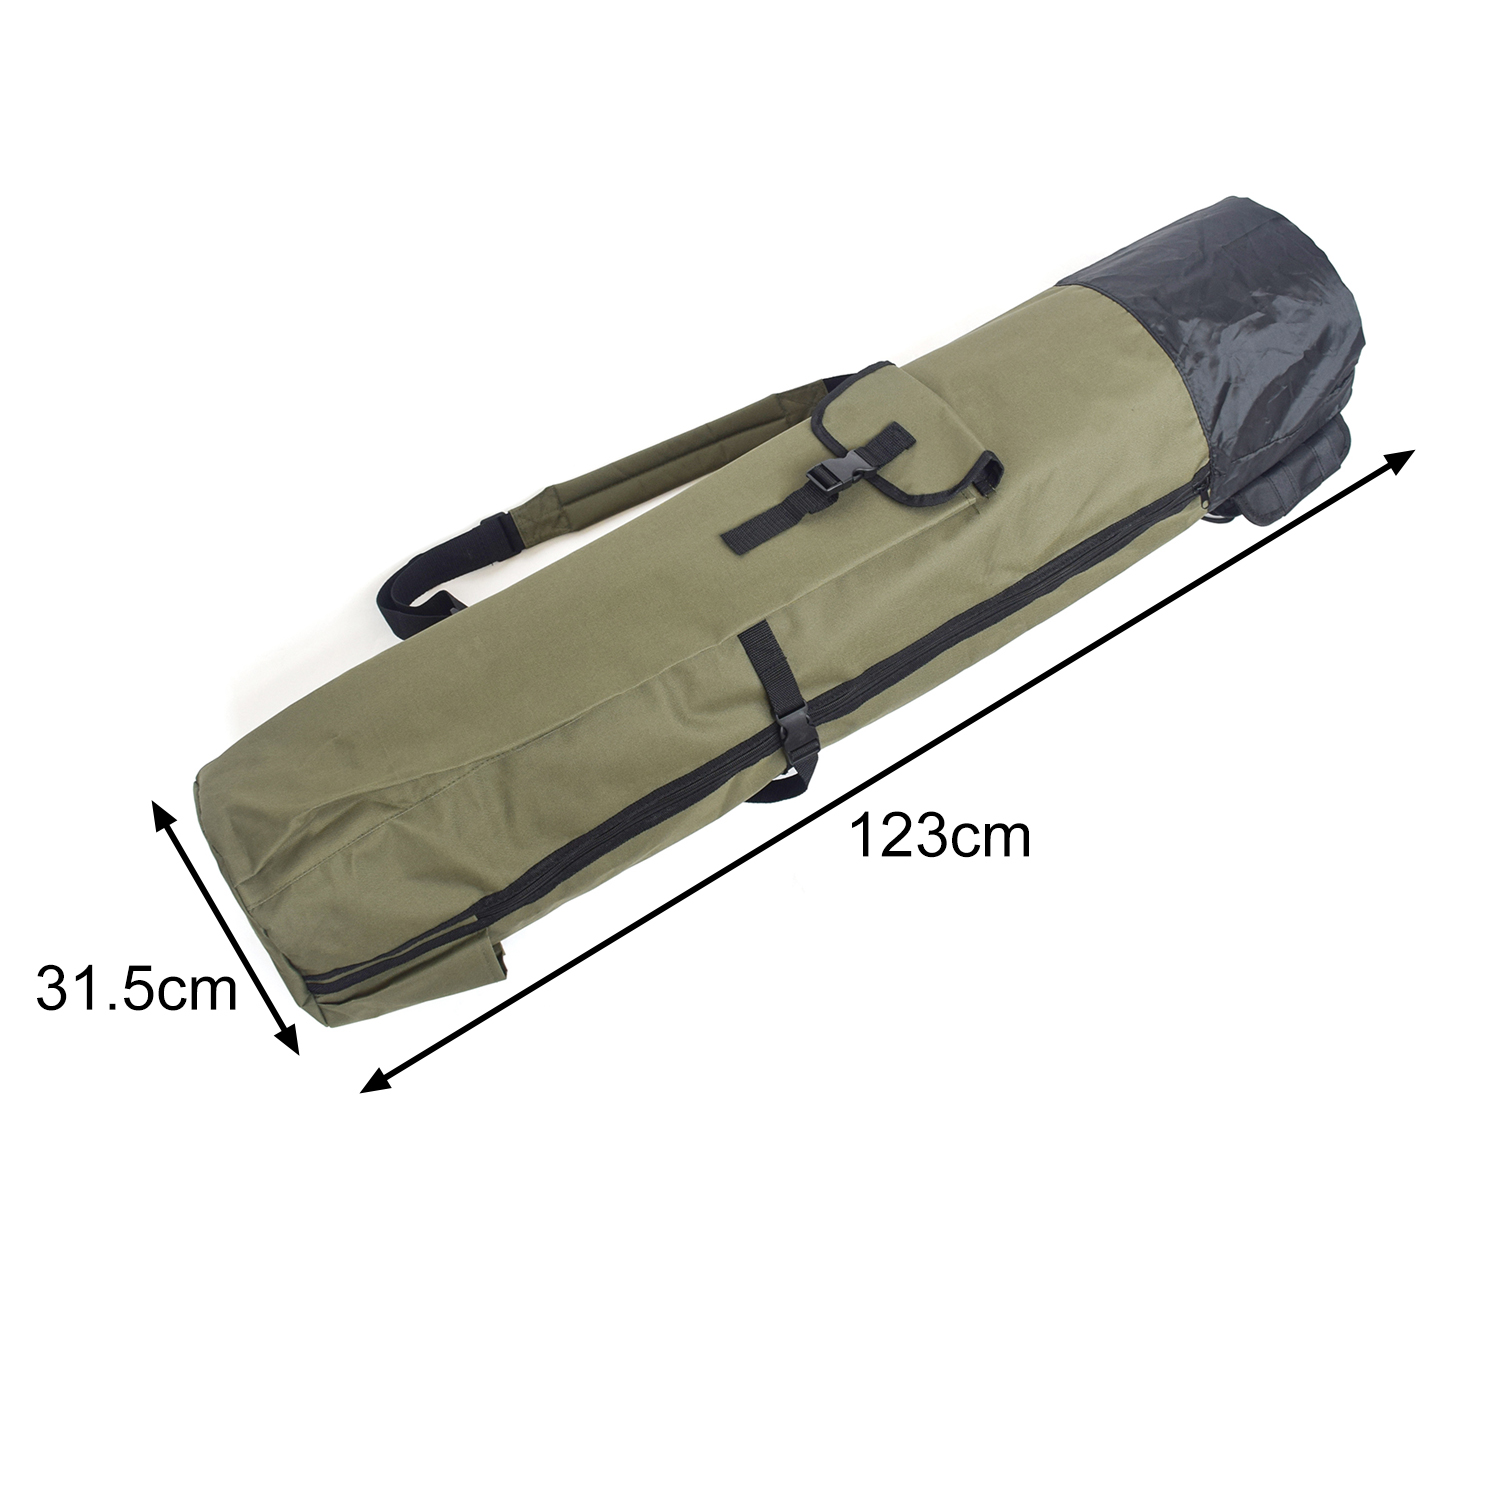 MSDFR-1 Sac pour canne à pêche taille 2